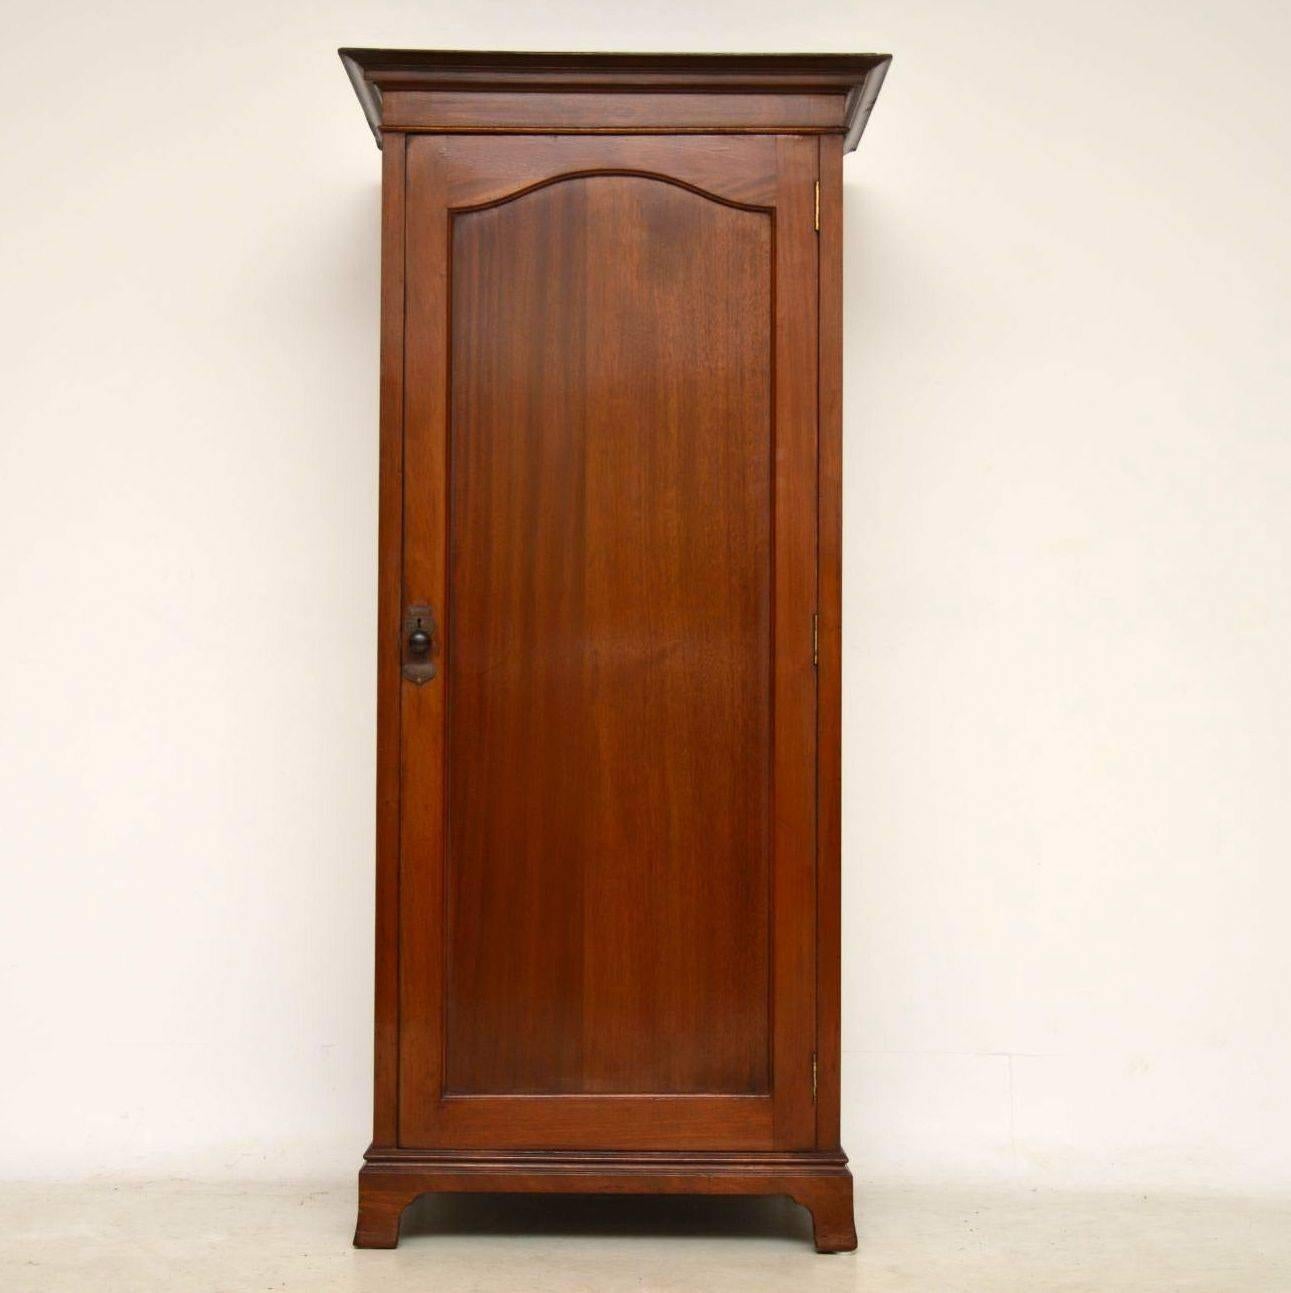 This small antique mahogany wardrobe could work well as a hall cupboard. In fact, I think that was what it was designed for. Perfect for hanging coats in & shoes at the bottom. There’s a hanging rail inside with sliding hooks attached. This wardrobe